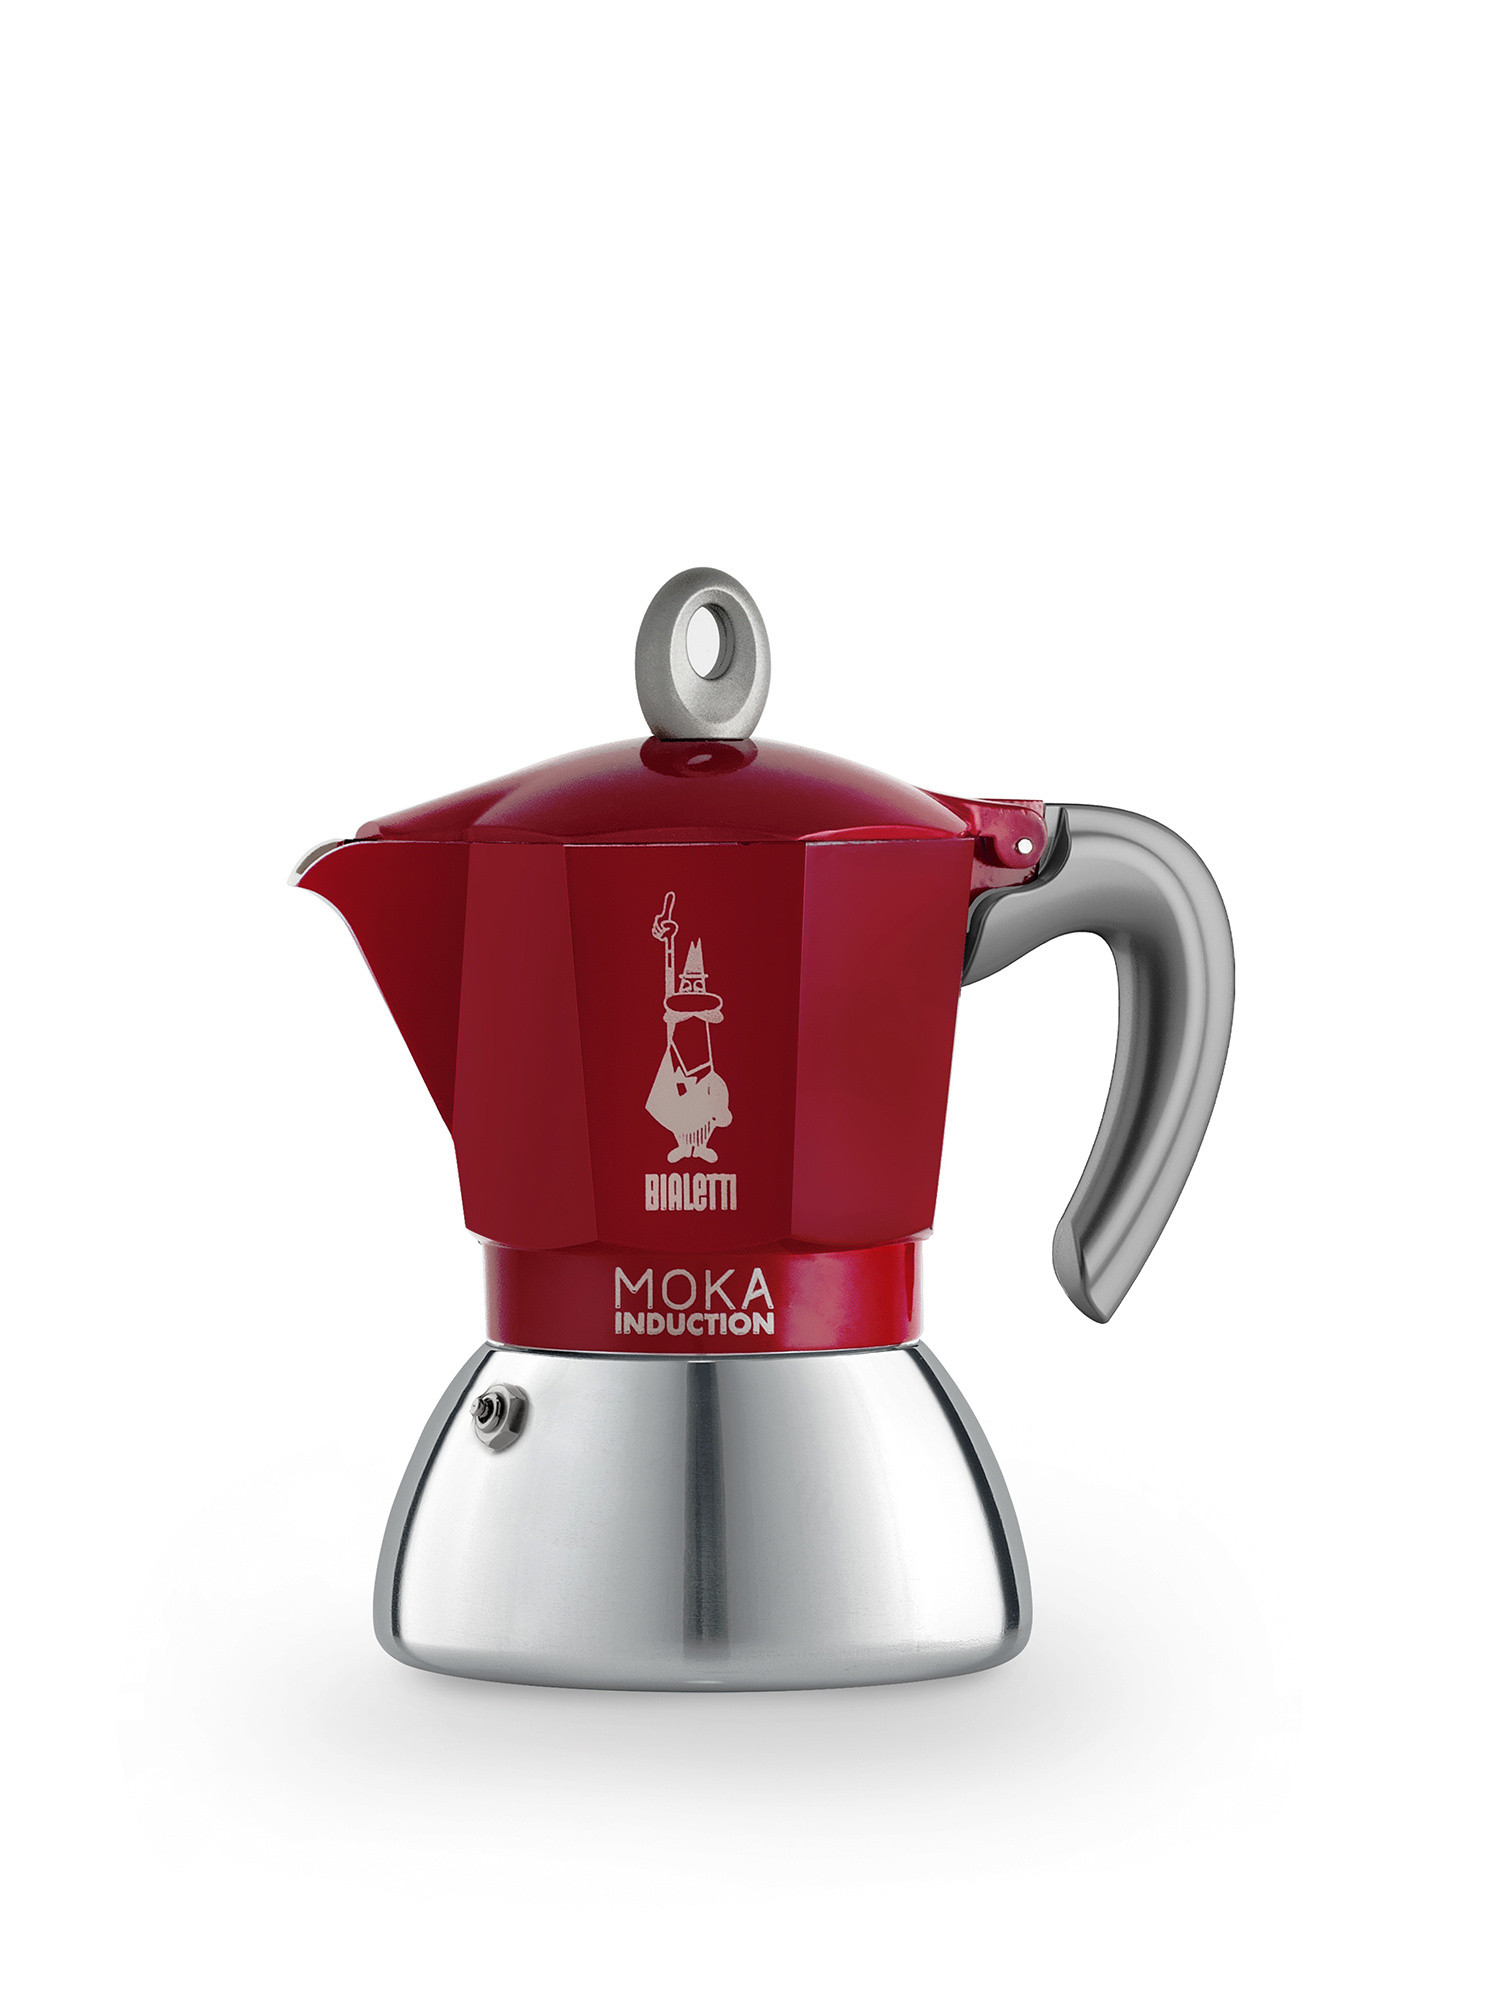 Bialetti - Moka Induction 4 tazze, Rosso, large image number 0